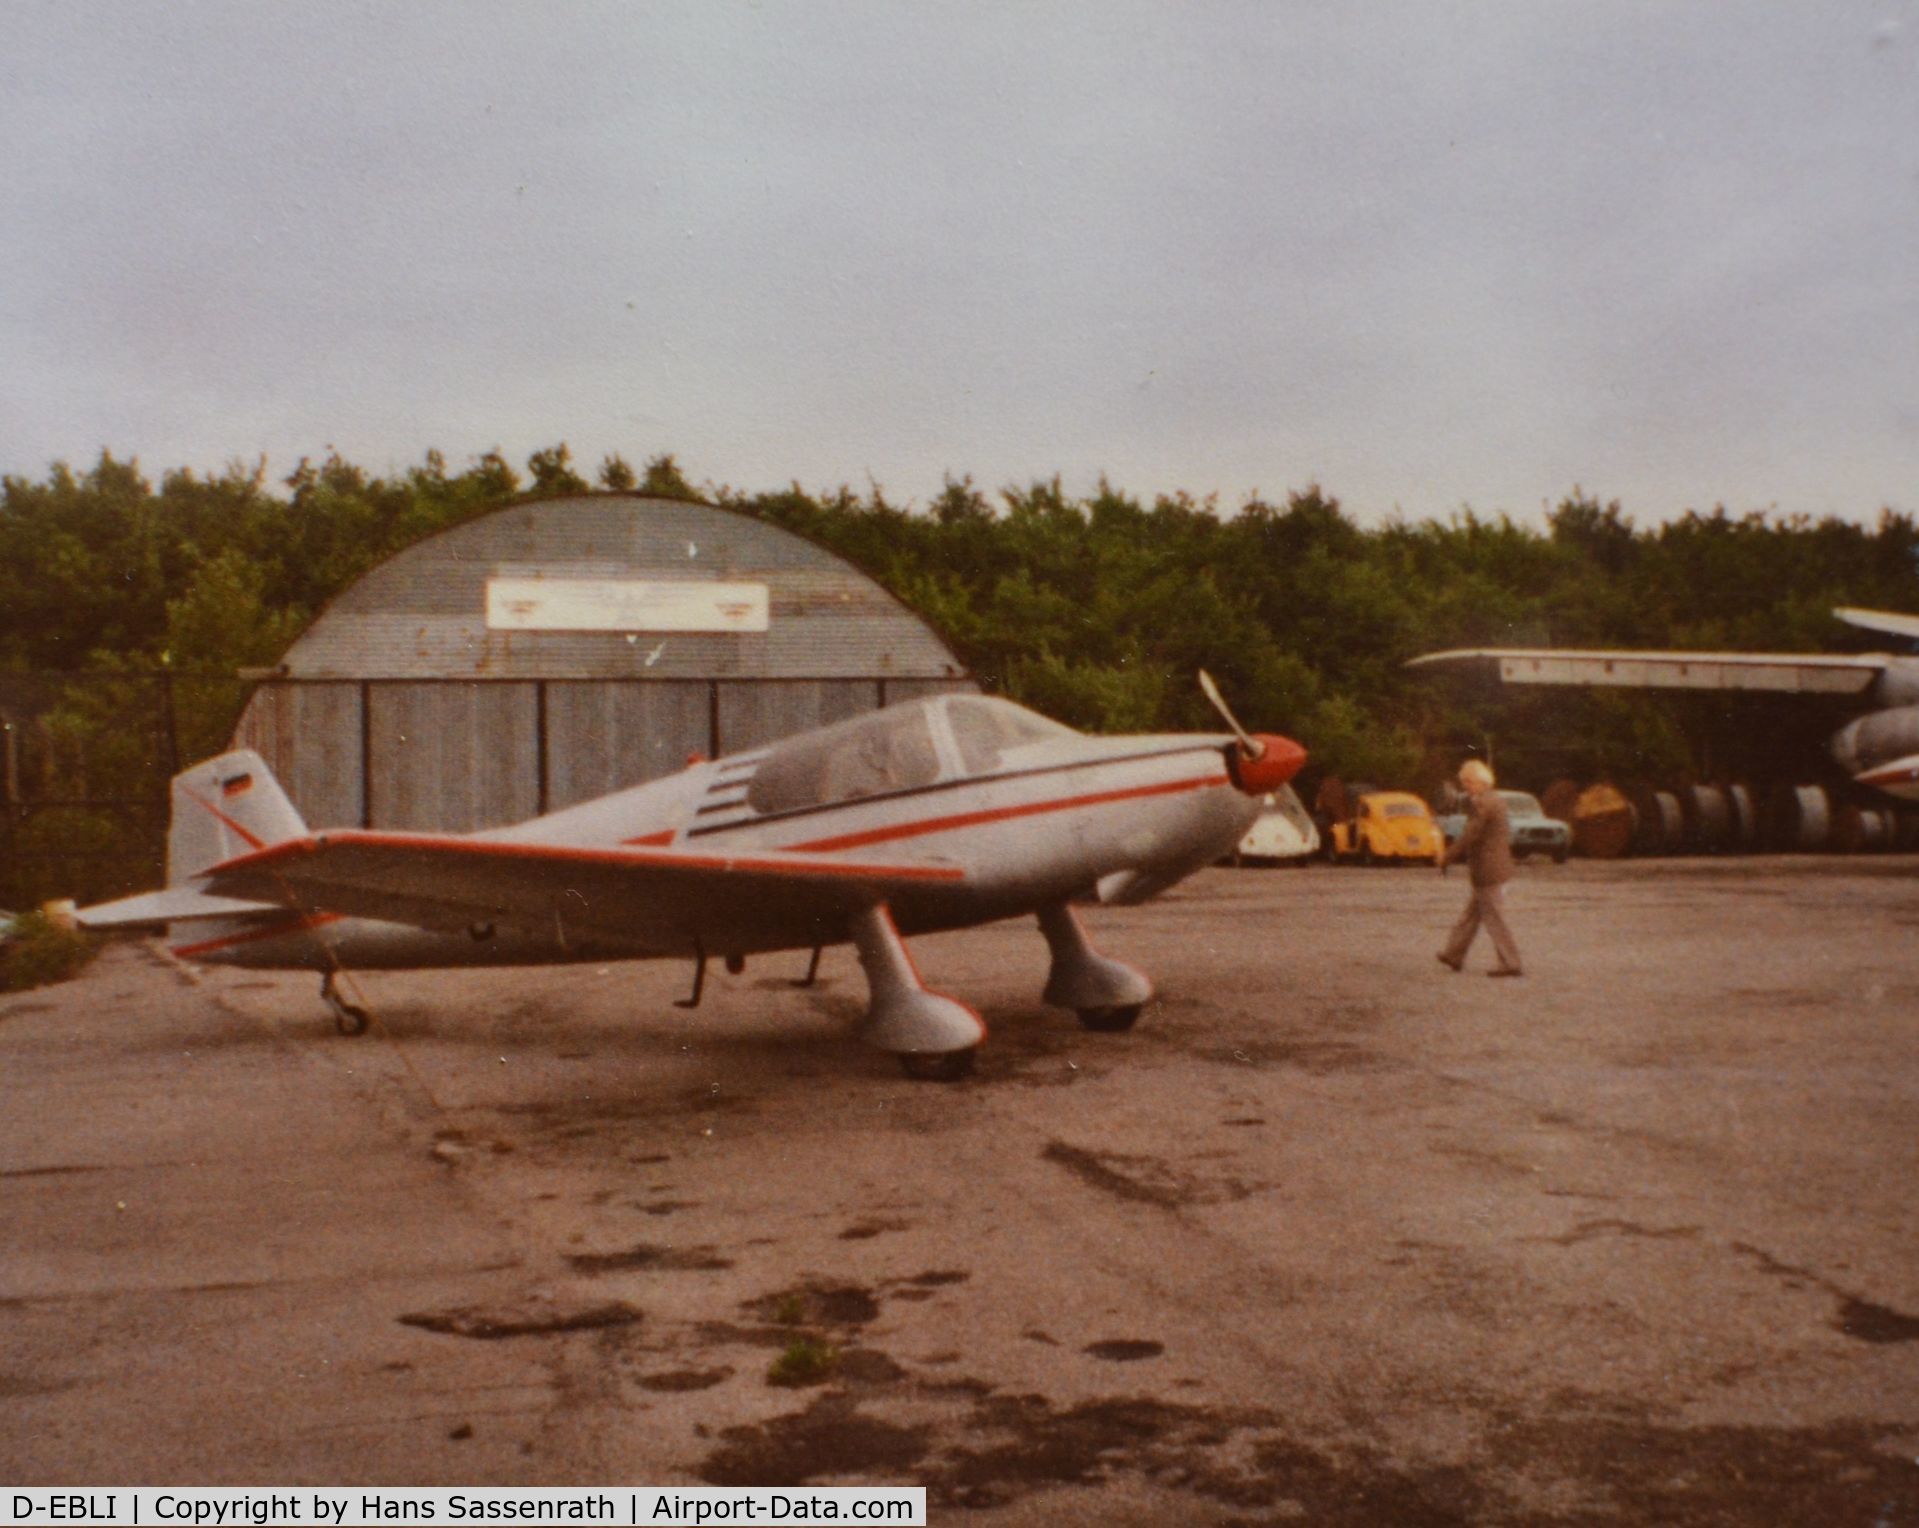 D-EBLI, Bolkow Bo-207 C/N 223, Plane of my father and his friends. In the early 1980s.